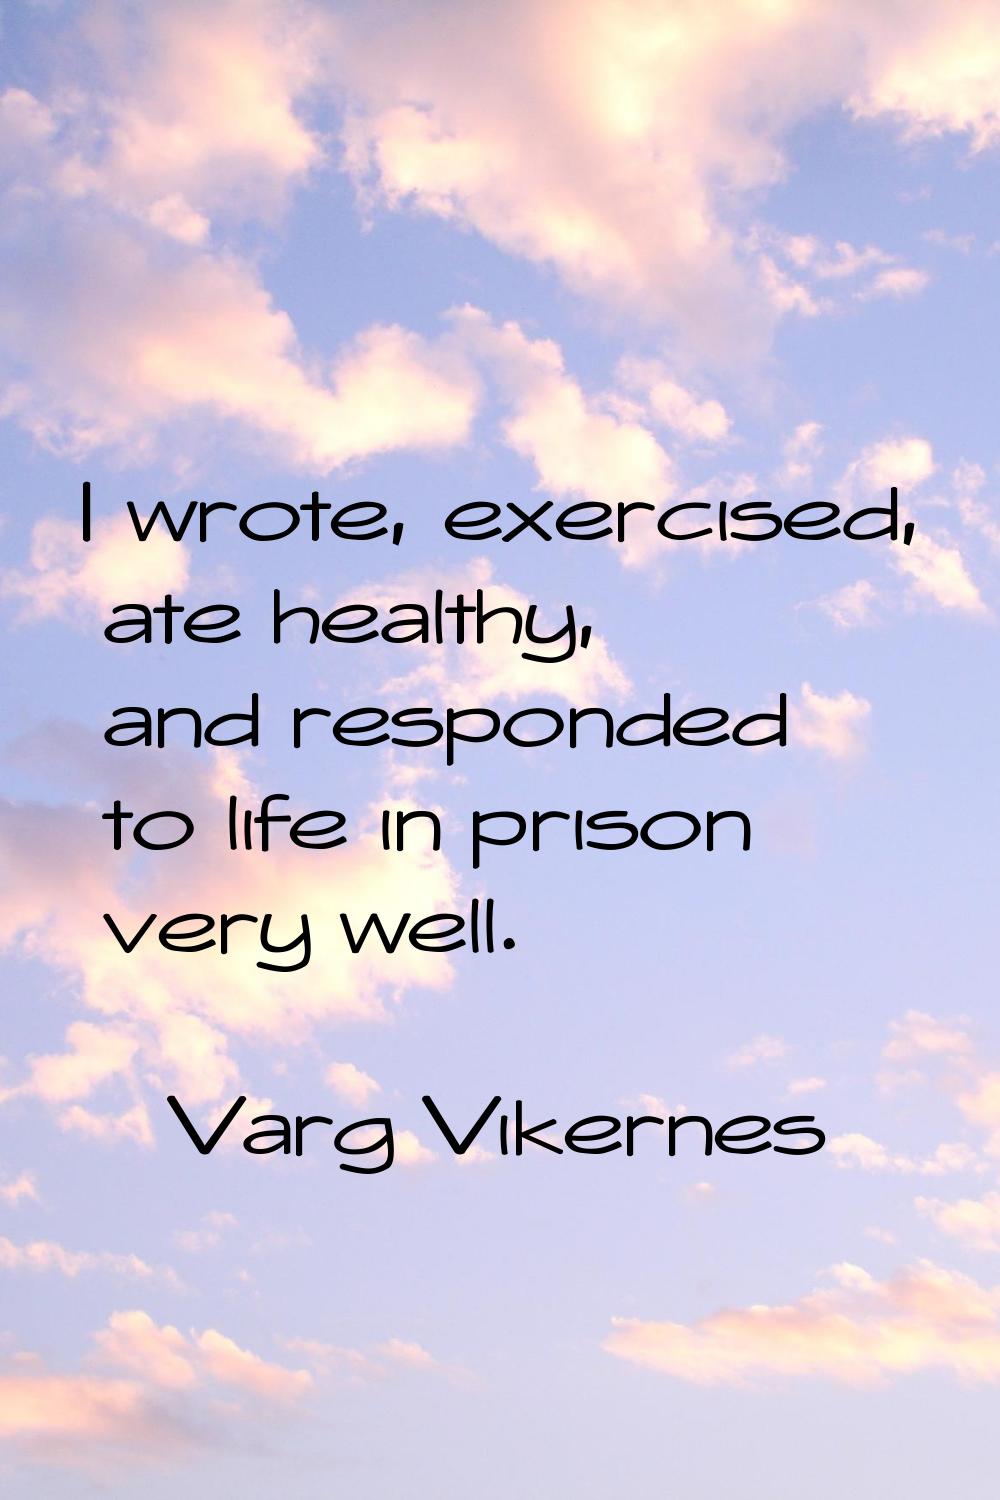 I wrote, exercised, ate healthy, and responded to life in prison very well.